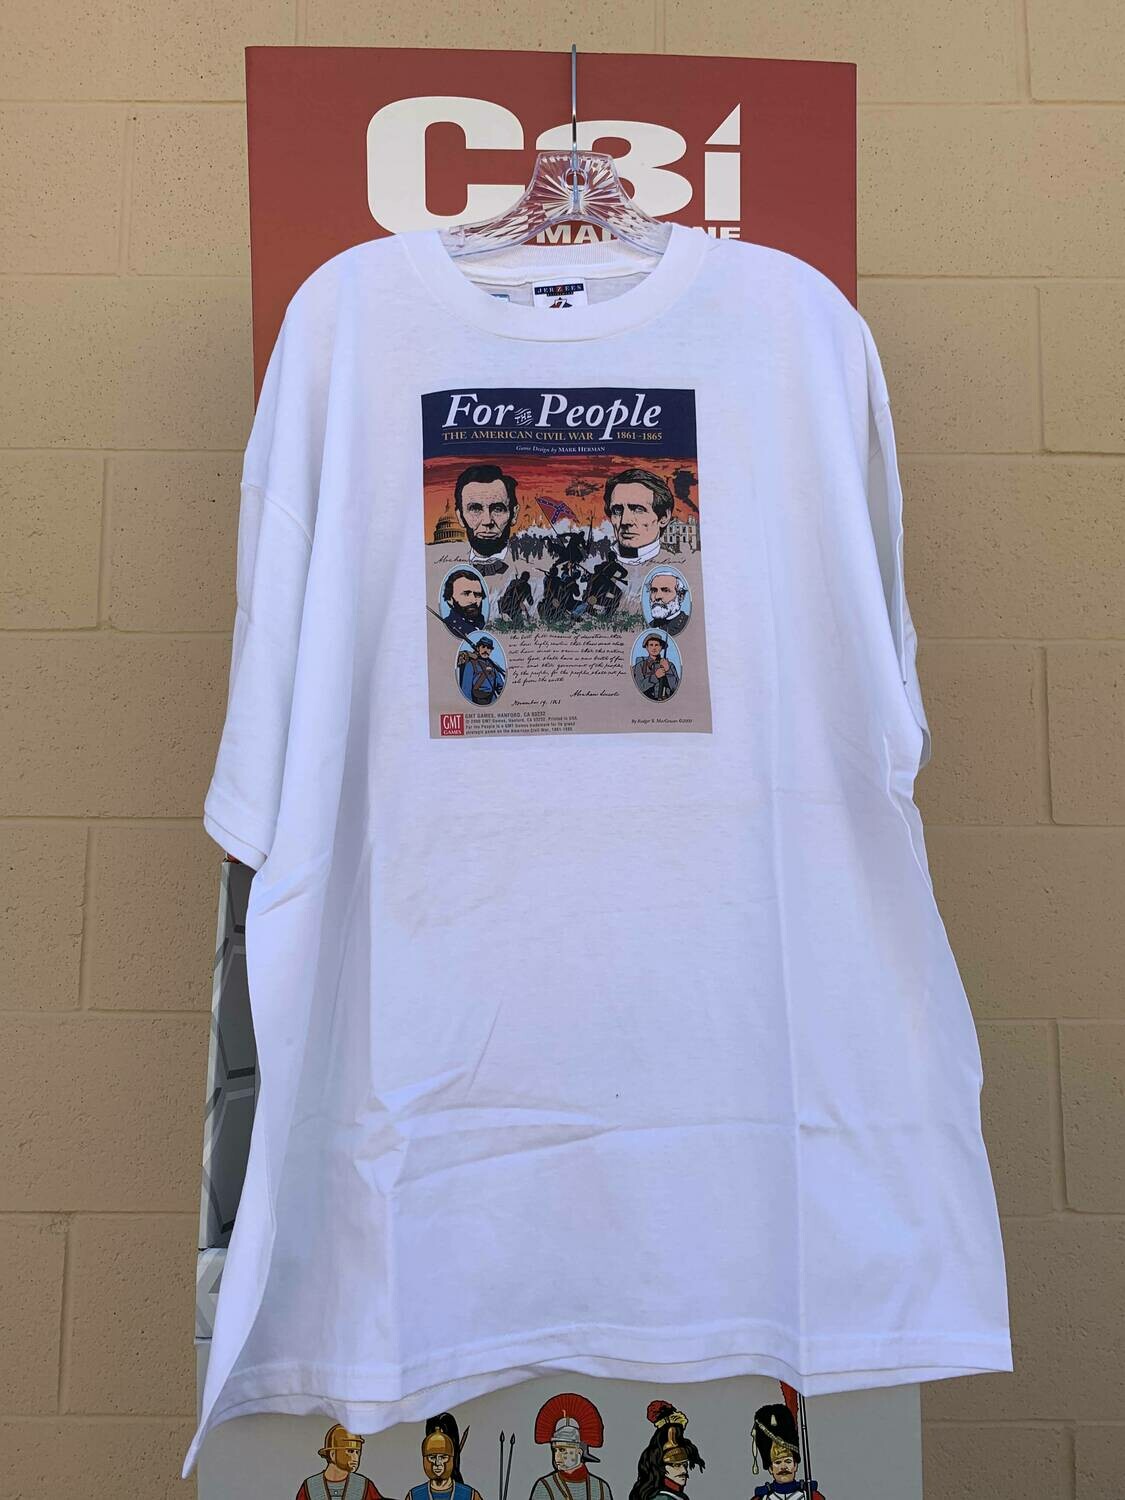 For the People Shirt